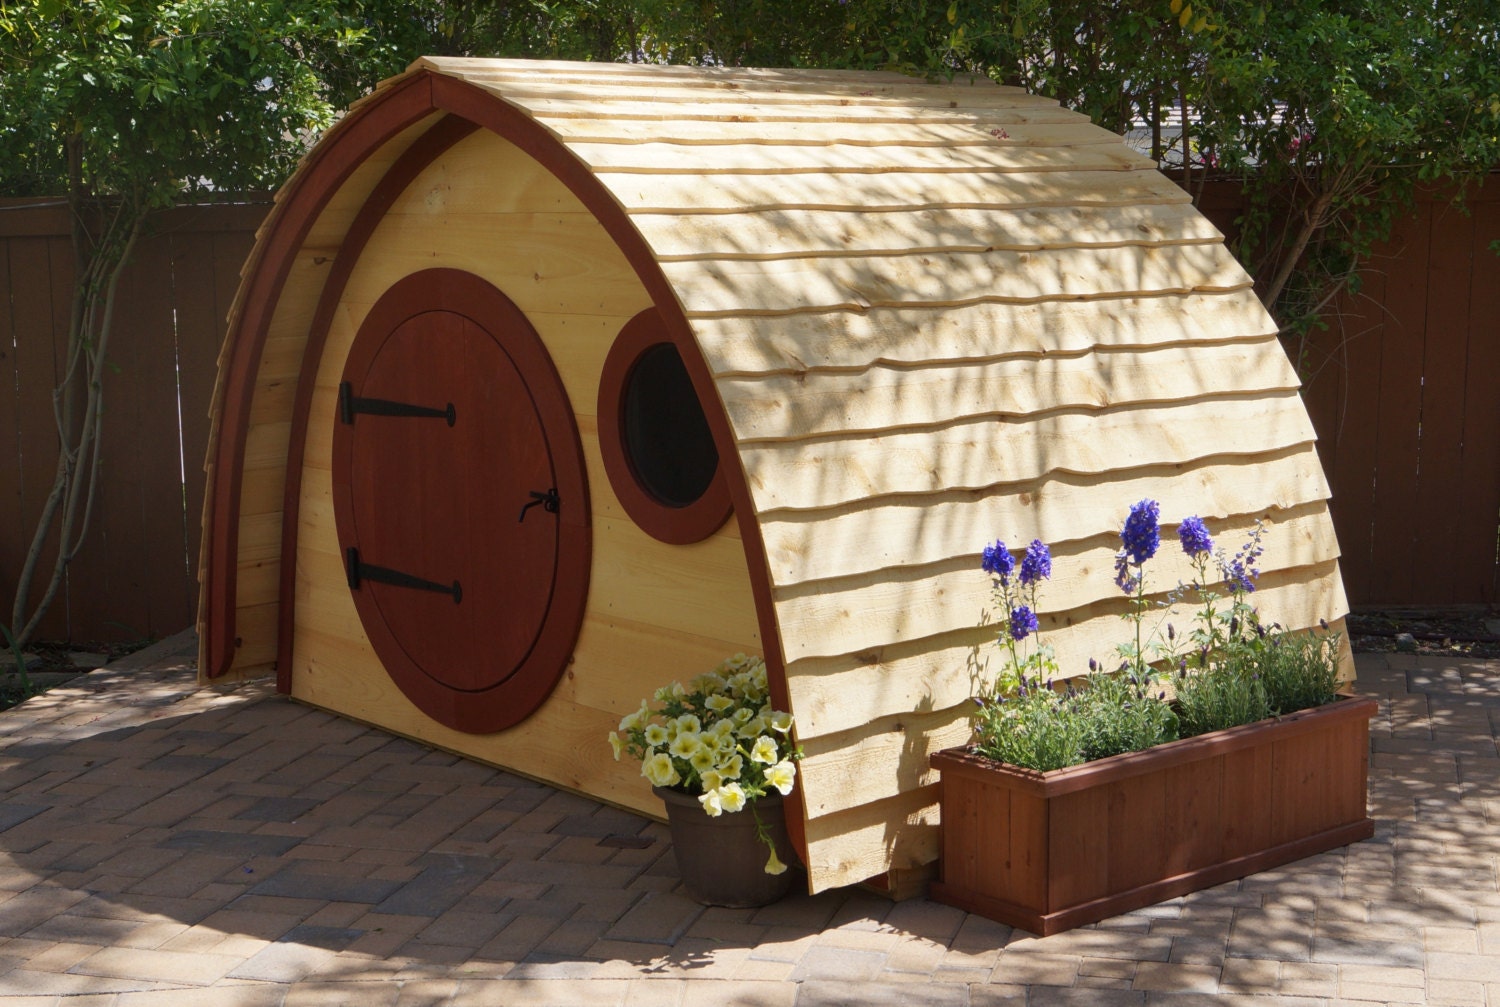 Hobbit Hole Playhouse Kit: outdoor wooden kids playhouse with